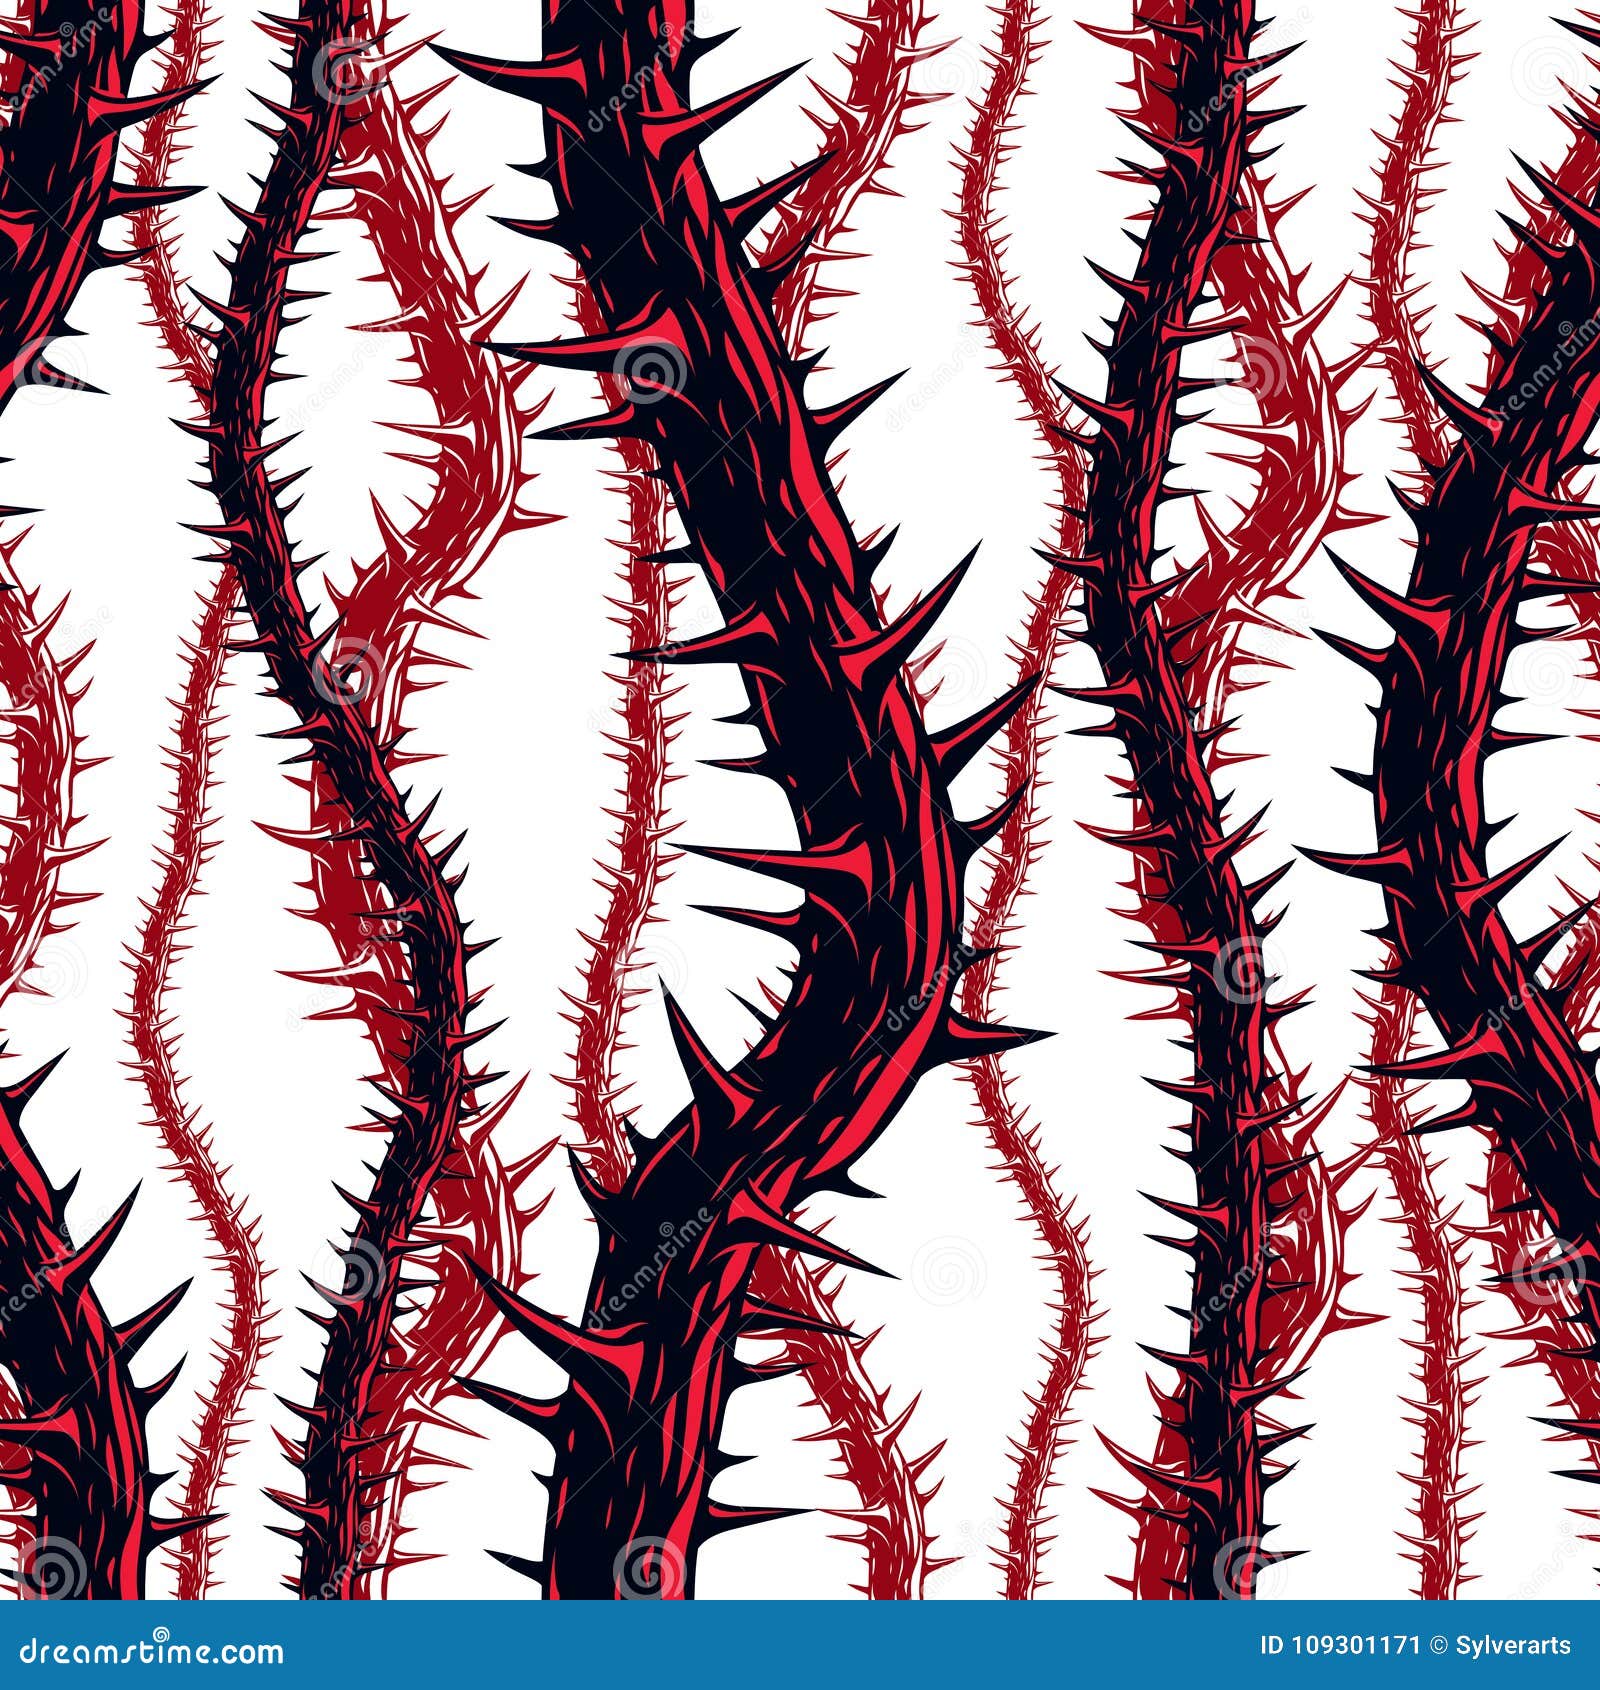 Disgusting Horror Art and Nightmare Seamless Pattern, Vector Background ...